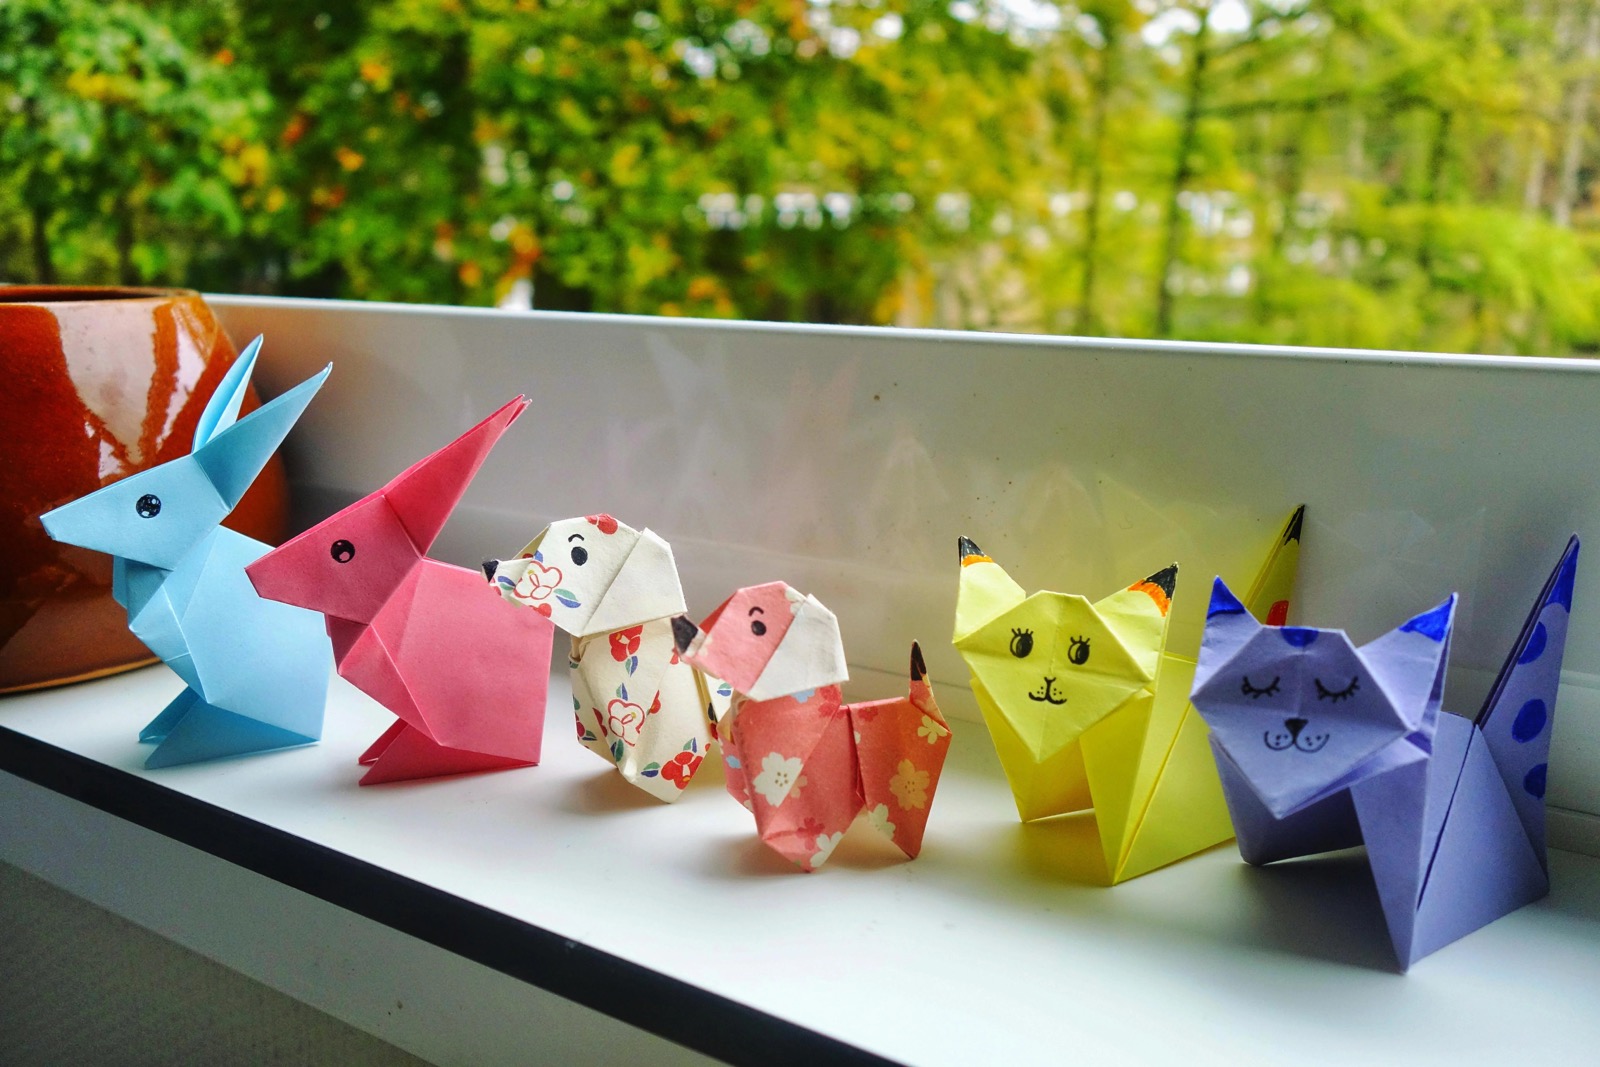 From Papyrus to Toilet Paper 🧻: This Is Likely the Hardest Quiz That’s All About Paper – Can You Pass It? Origami animals